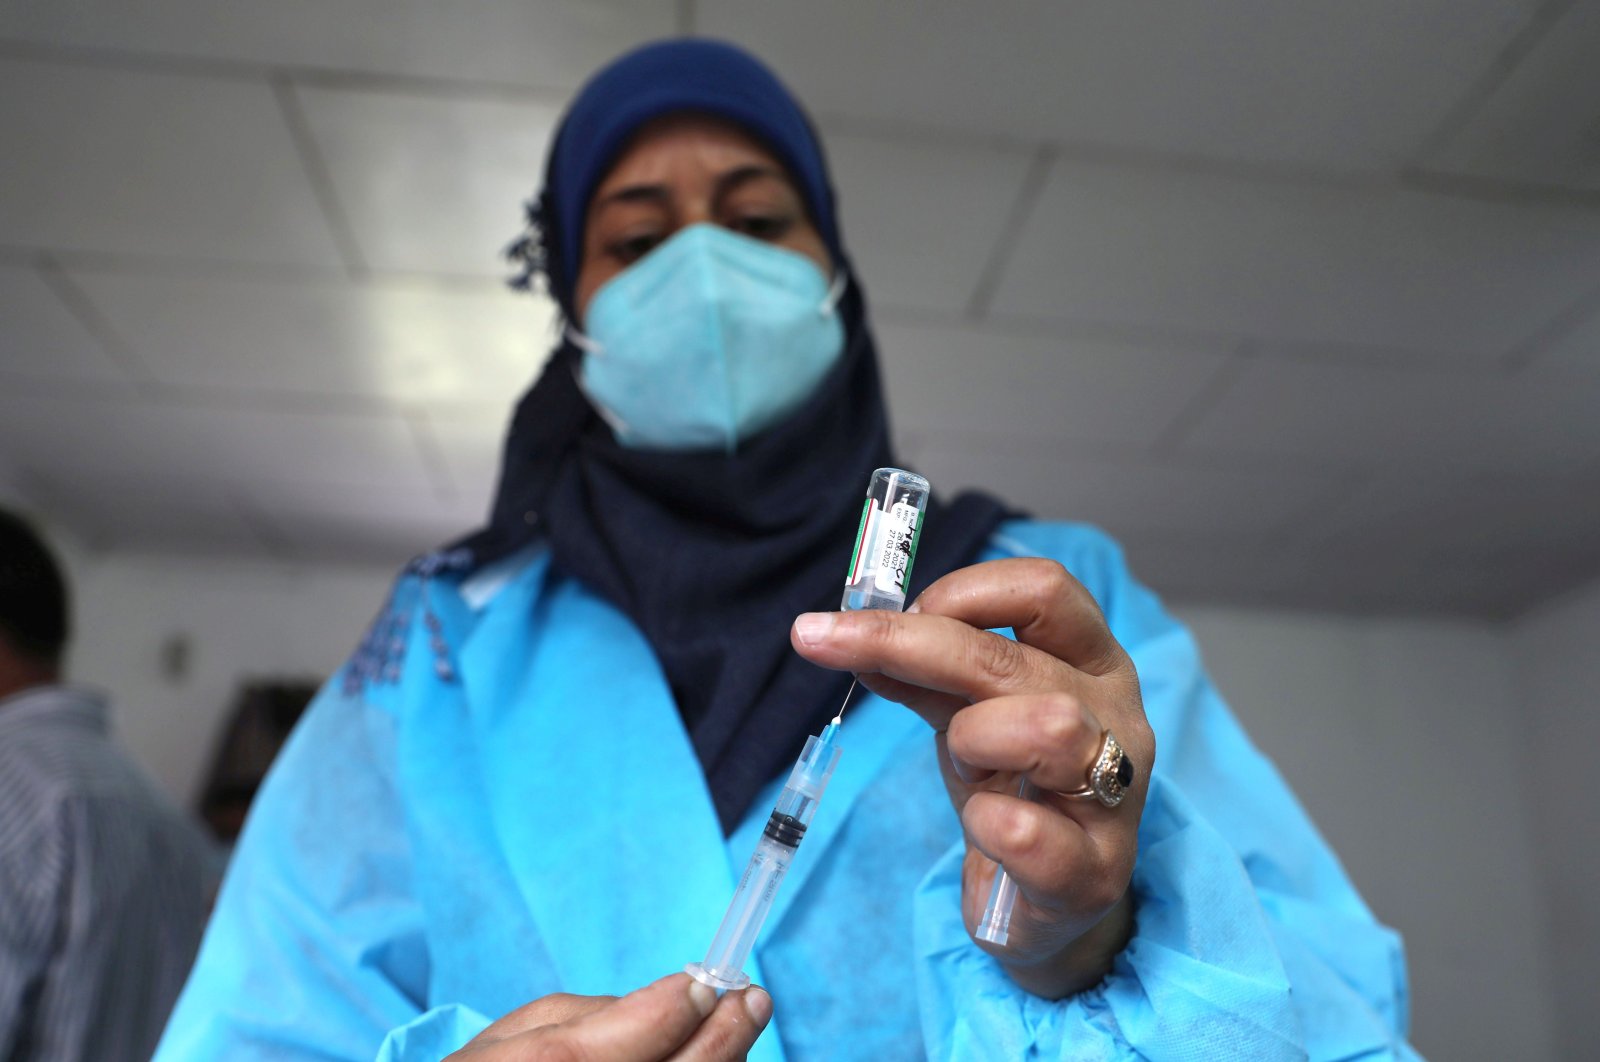 A paramedic prepares to inject a shot of COVID-19 vaccine during a vaccination drive in Srinagar, India, Sept. 1, 2021. (EPA Photo)